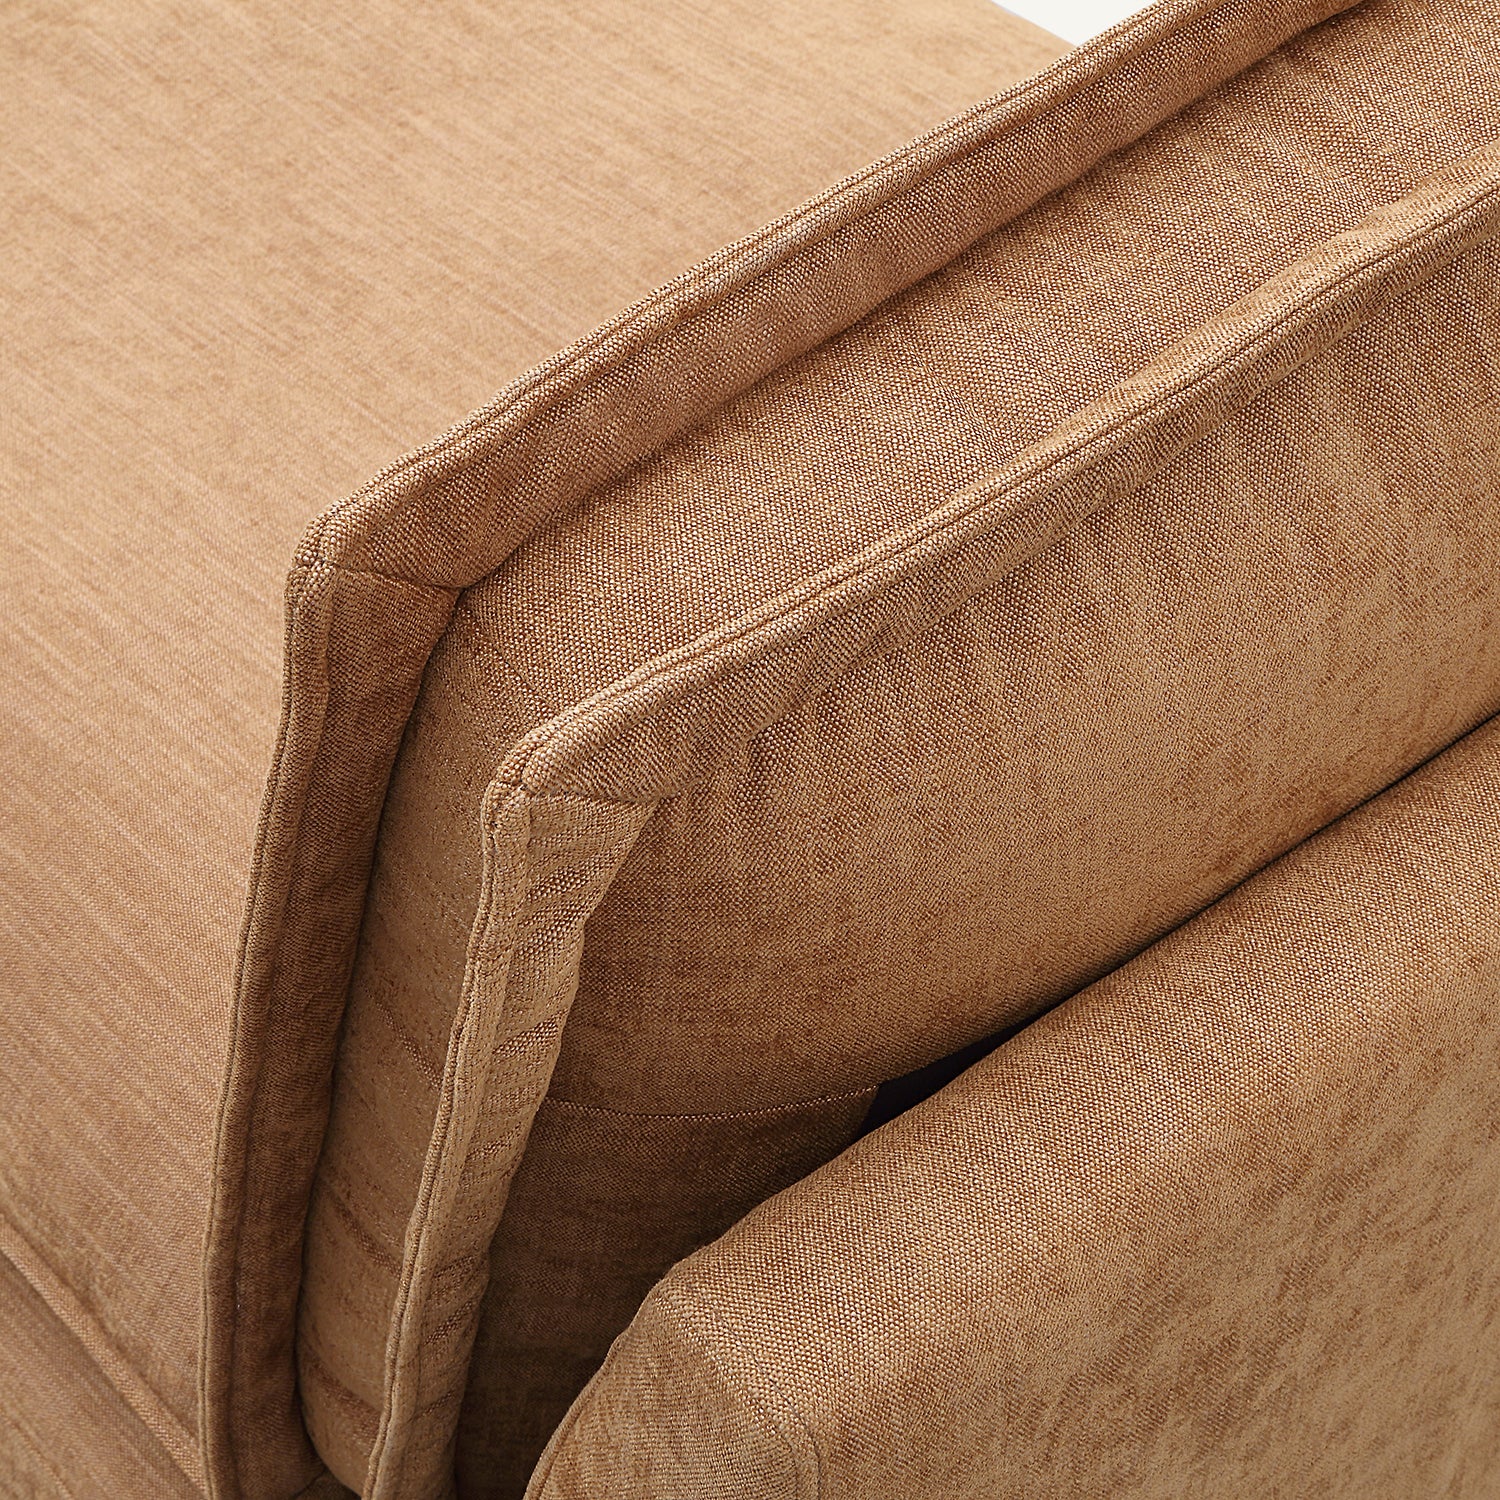 Stacked Tan Linen Loveseat with Ottoman